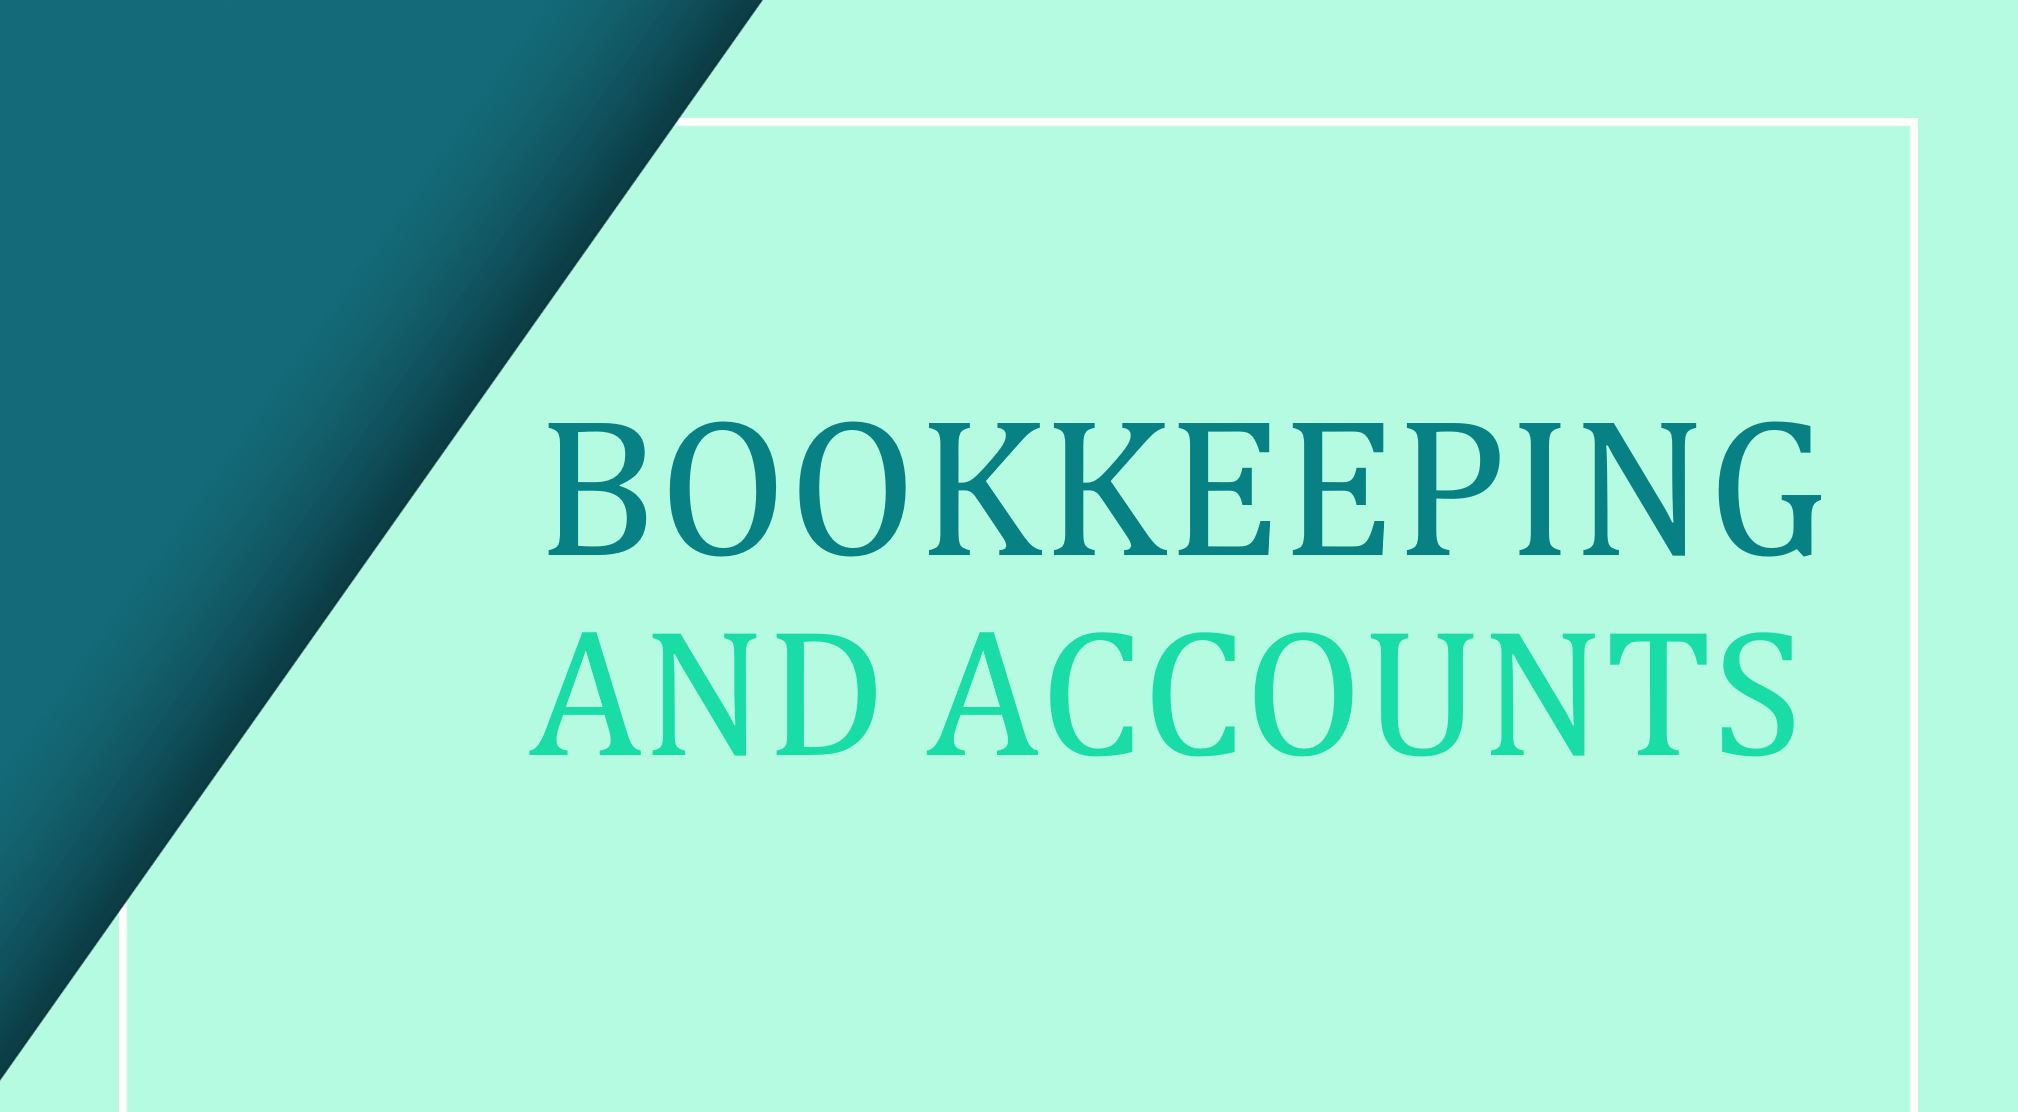 T1: Bookkeeping and Accounts